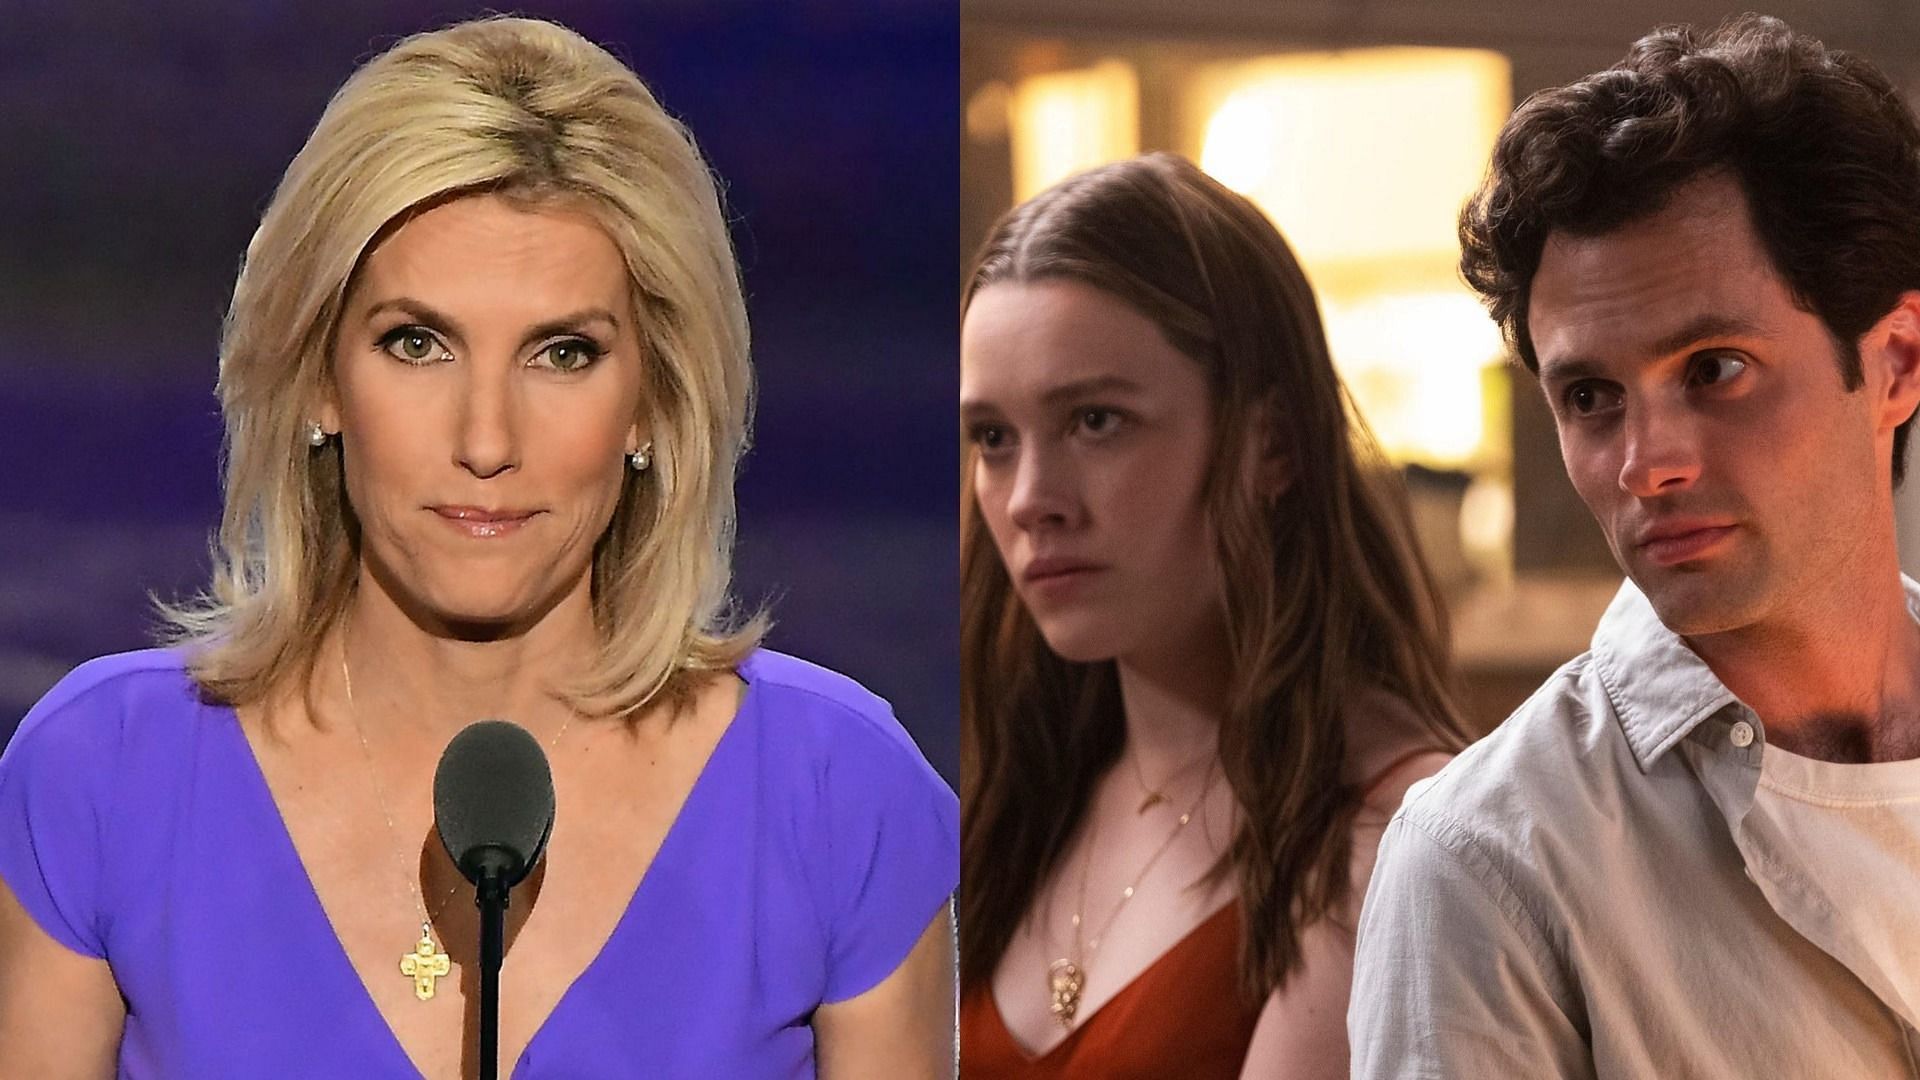 Laura Ingraham was left confused at a &#039;You&#039; mention on her show &#039;The Ingraham Angle&#039; (Image via Getty Images)